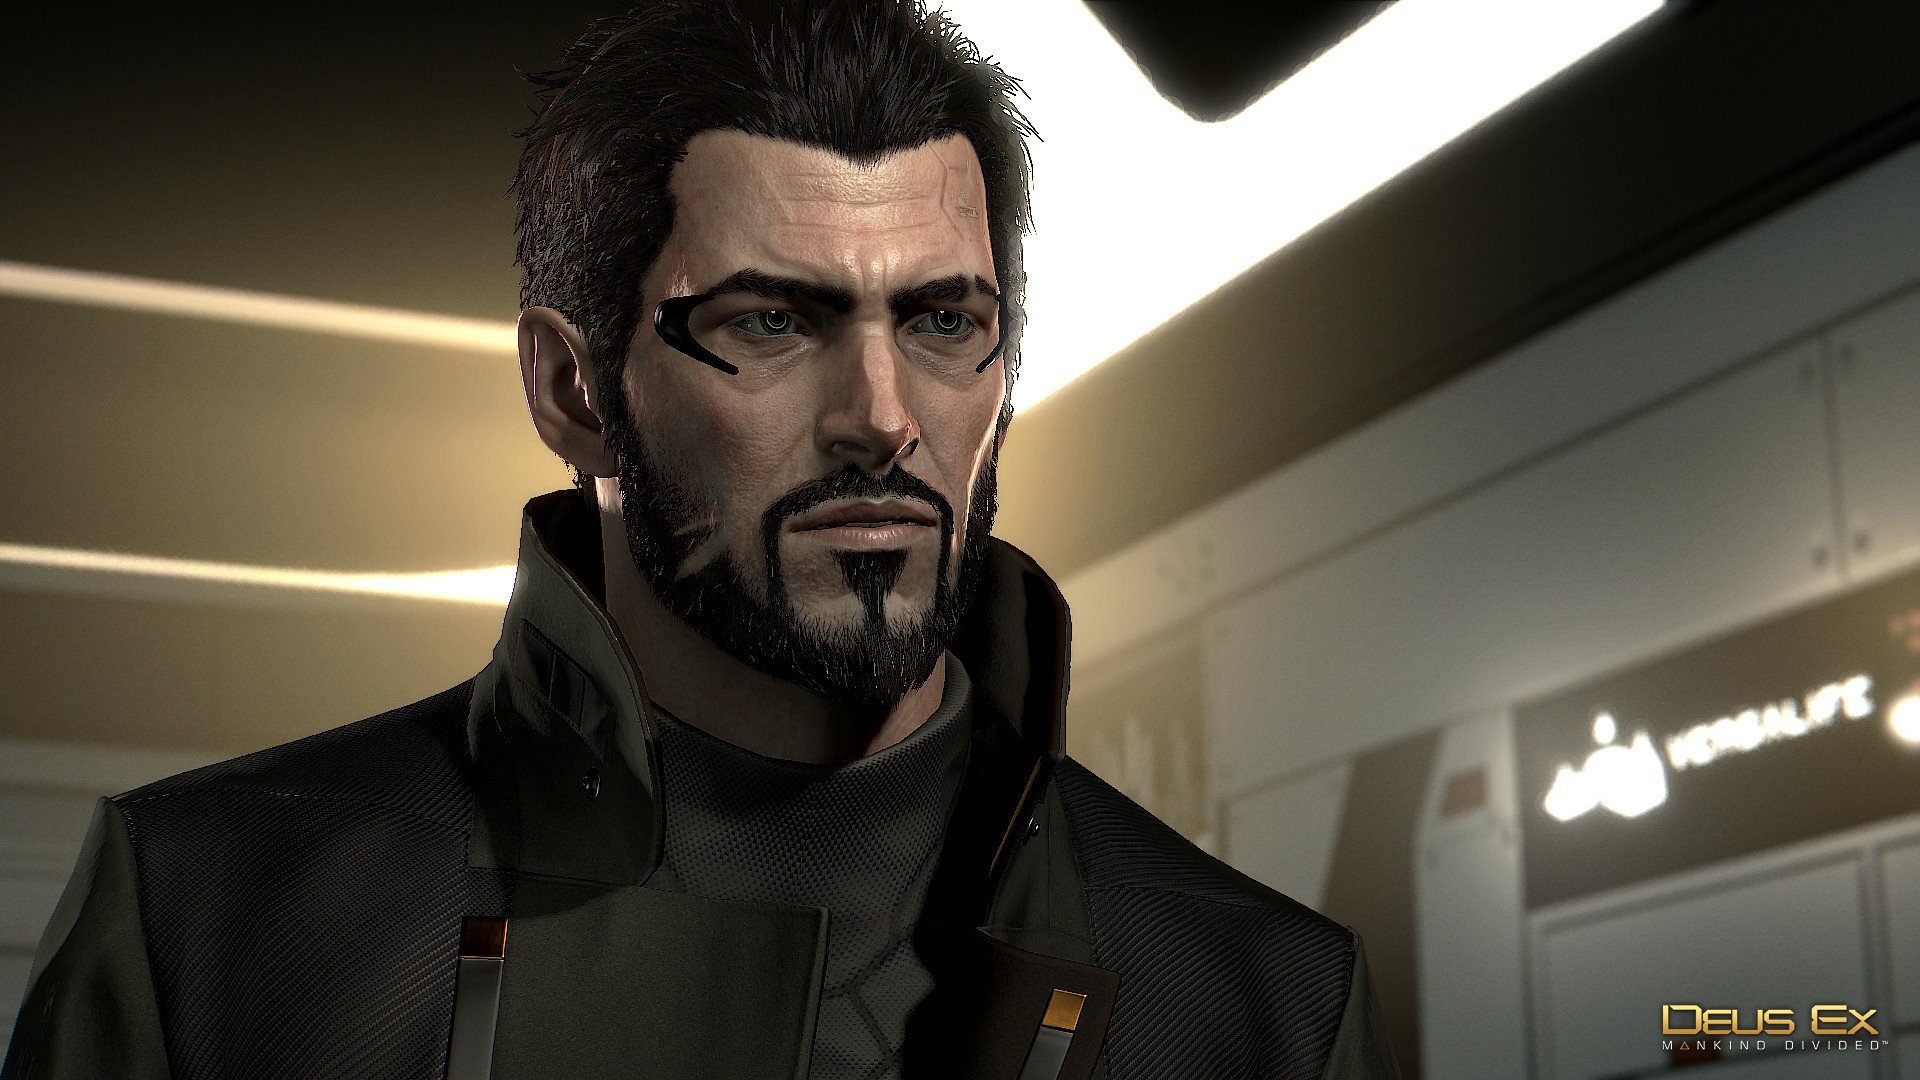 Deus Ex Mankind Divided Hd Wallpaper Background Image Images, Photos, Reviews